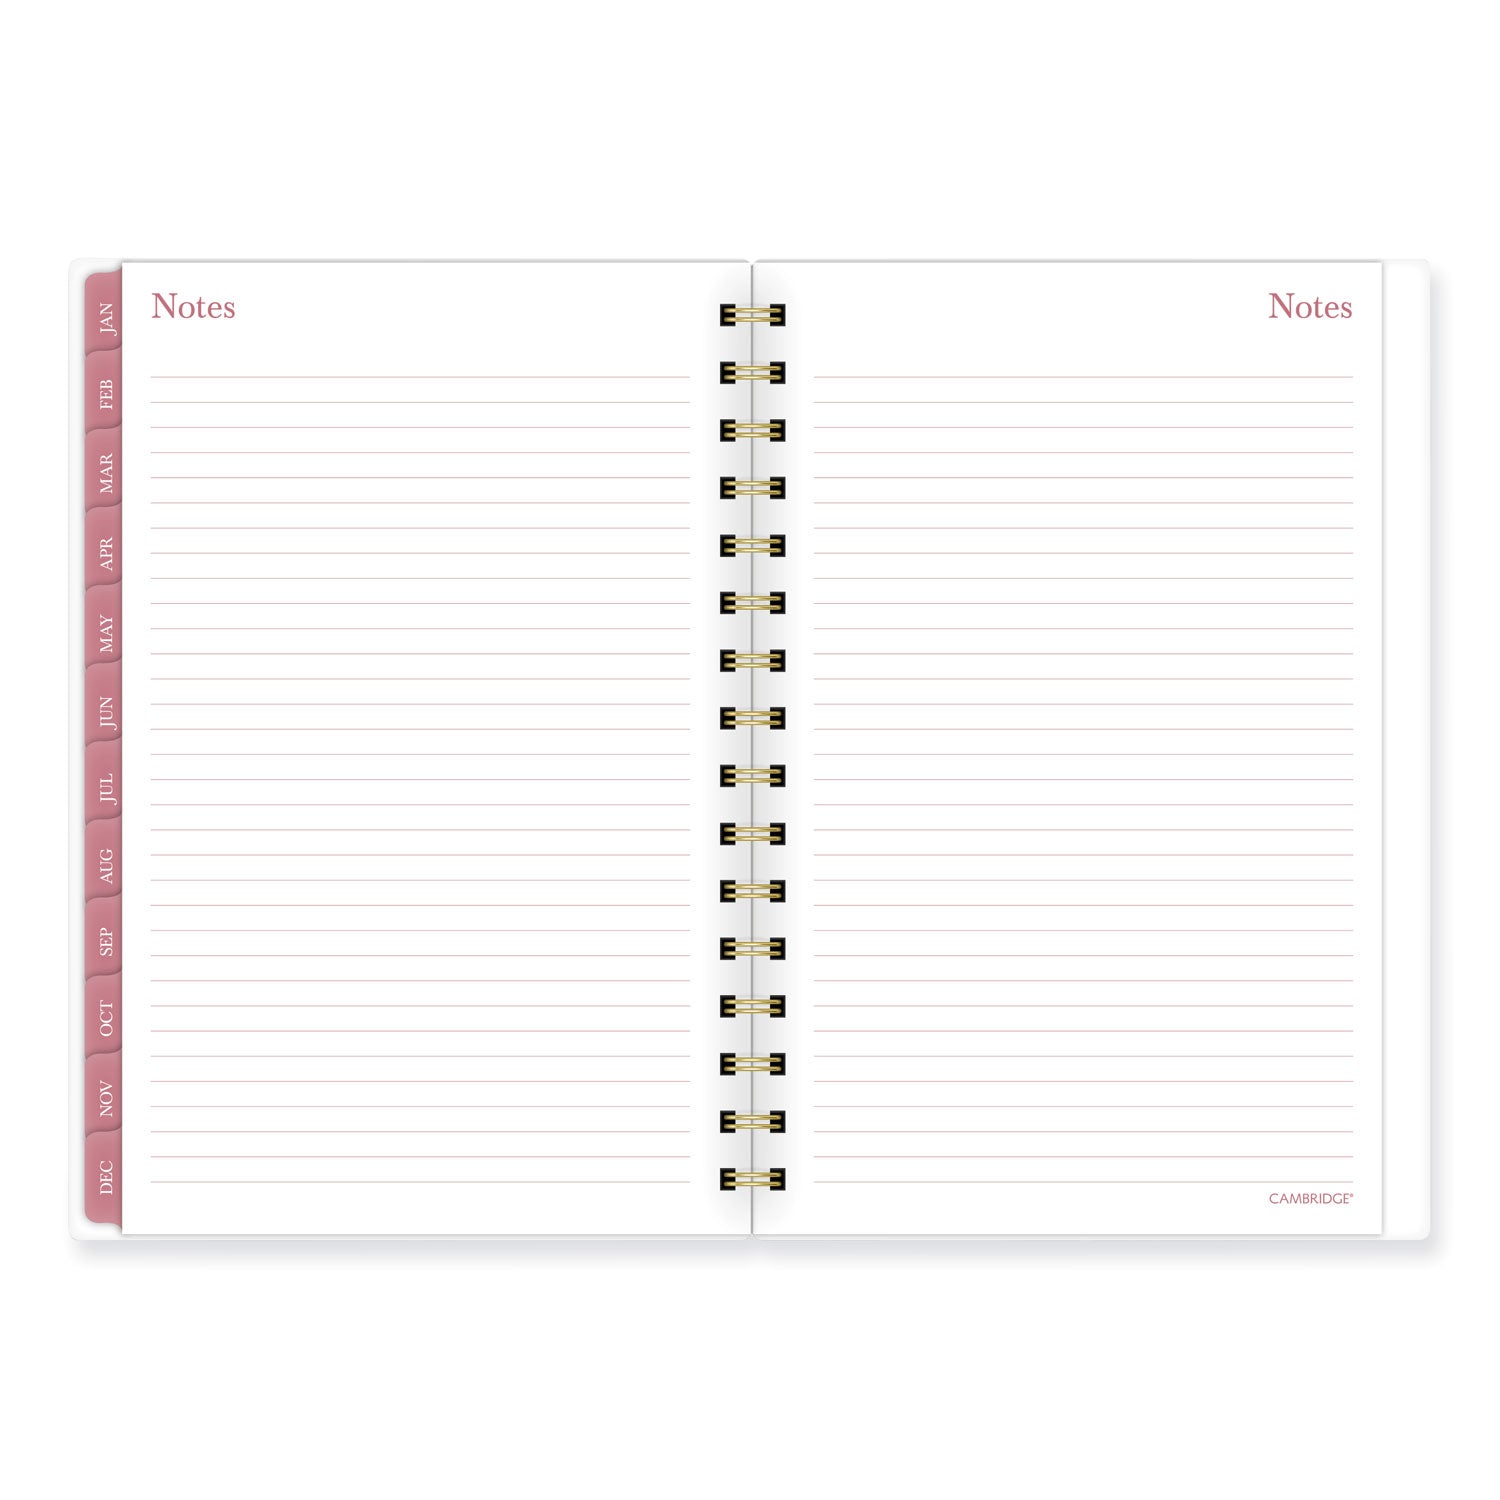 Cambridge Thicket Weekly/Monthly Planner - Small Size - Weekly, Monthly - 12 Month - January 2024 - December 2024 - 5 1/2" x 8 1/2" Sheet Size - Wire Bound - Multi - To-do List, Durable, Flexible, Snag Resistant, Double-sided Pocket, Dated Planning P - 2